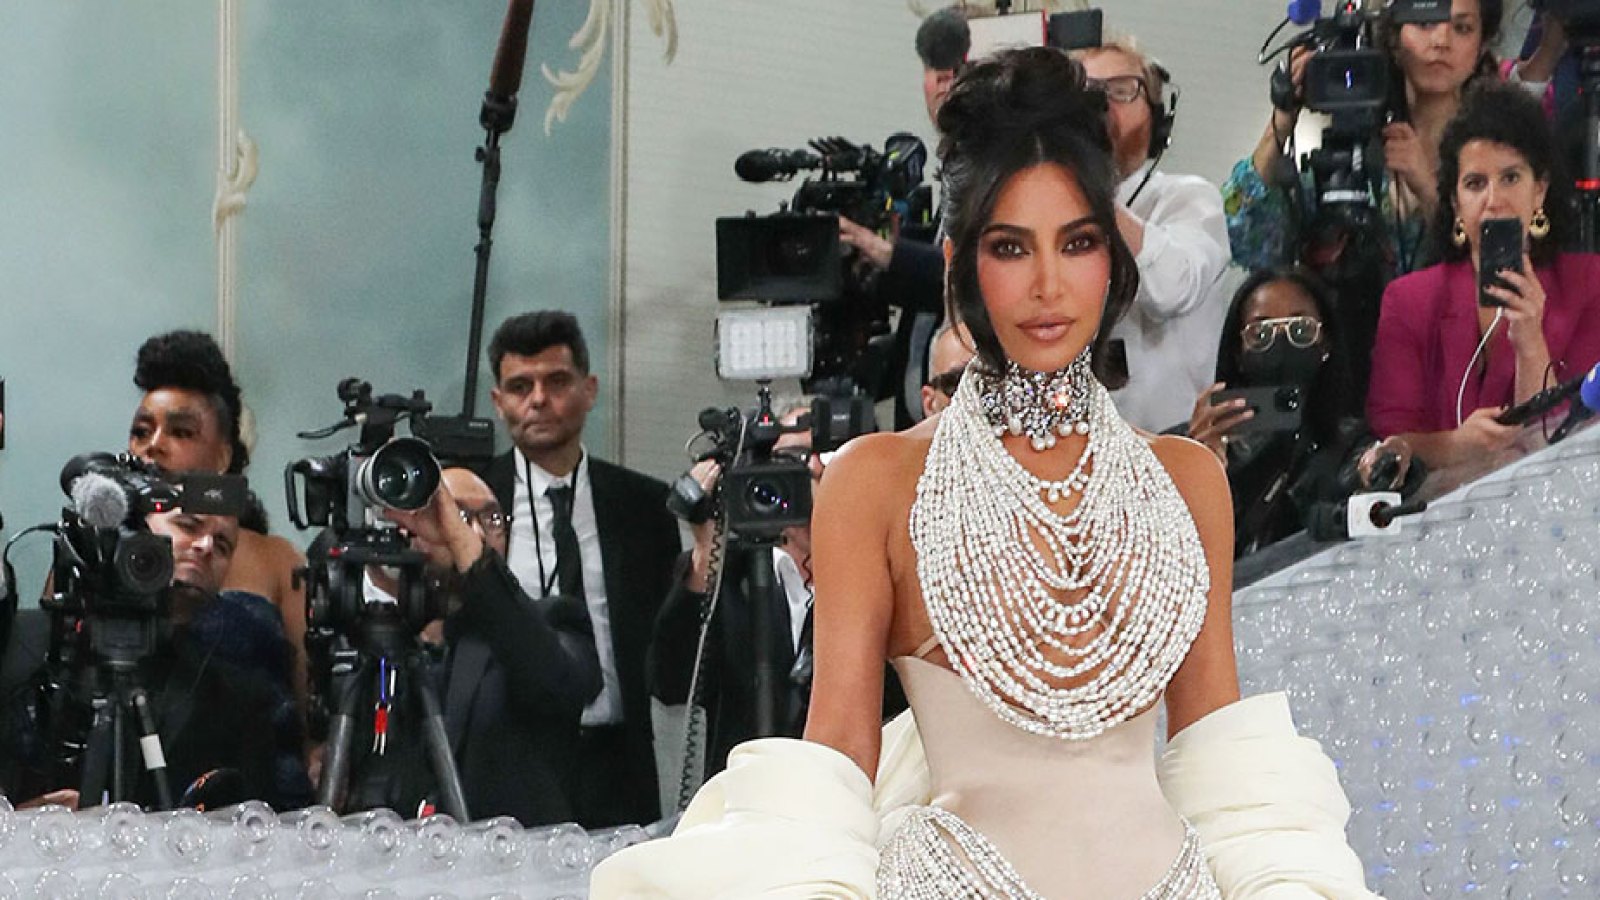 Feature Kim Kardashian Reveals She Is Taking Acting Lessons Ahead of AHS Role